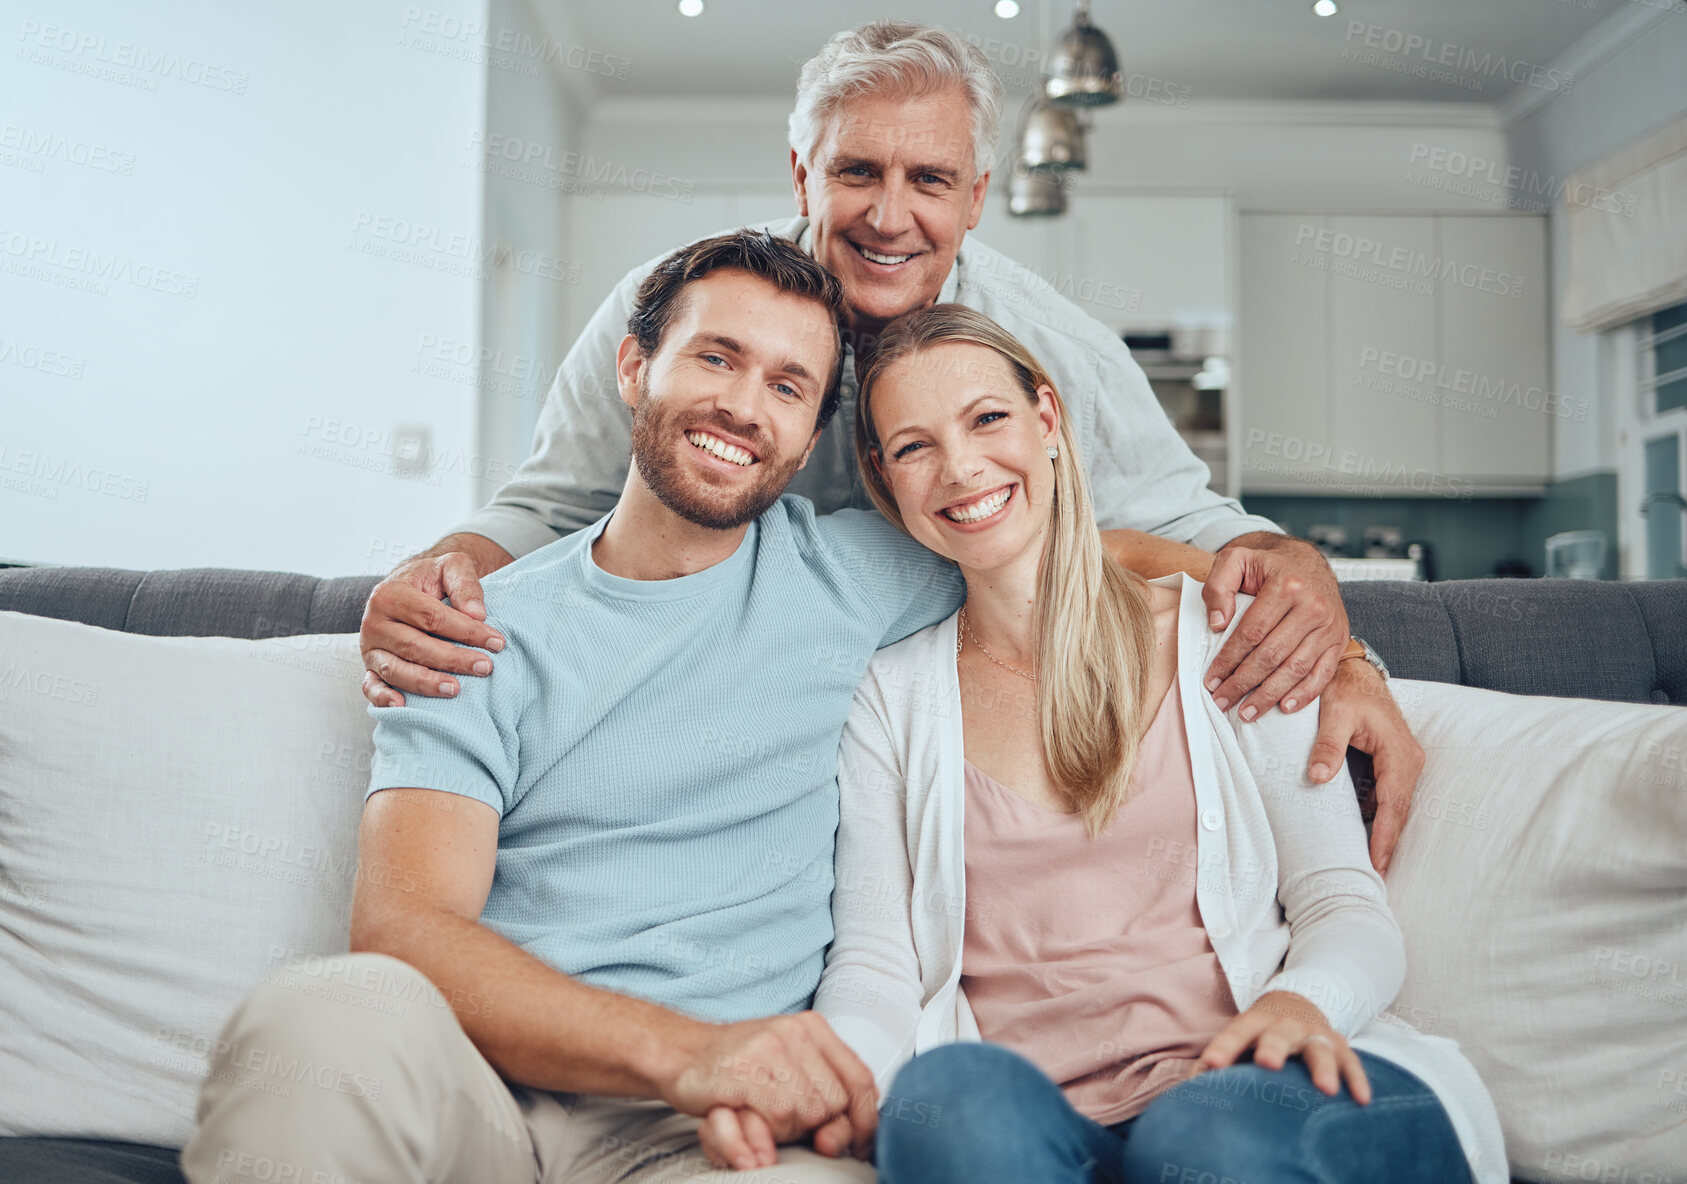 Buy stock photo Portrait, family and relax on sofa in living room, smiling and bonding. Love, care and grandfather, man and woman embrace on couch in lounge, having fun and enjoying quality time together in house.